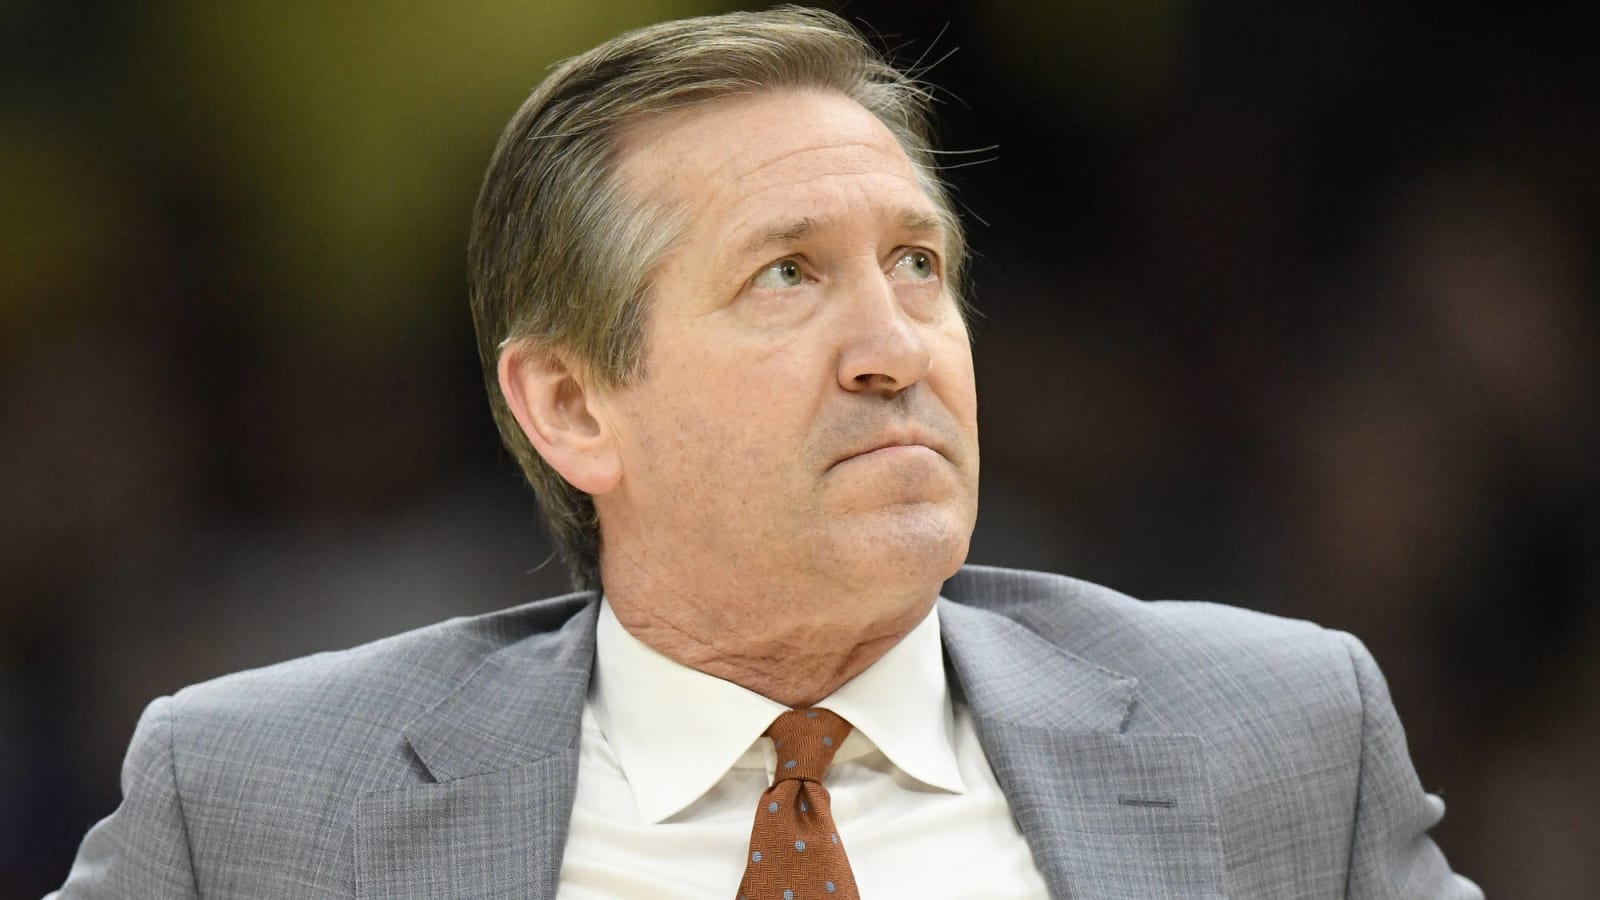 Hornacek’s daughter posts heartfelt tribute to father upon his firing